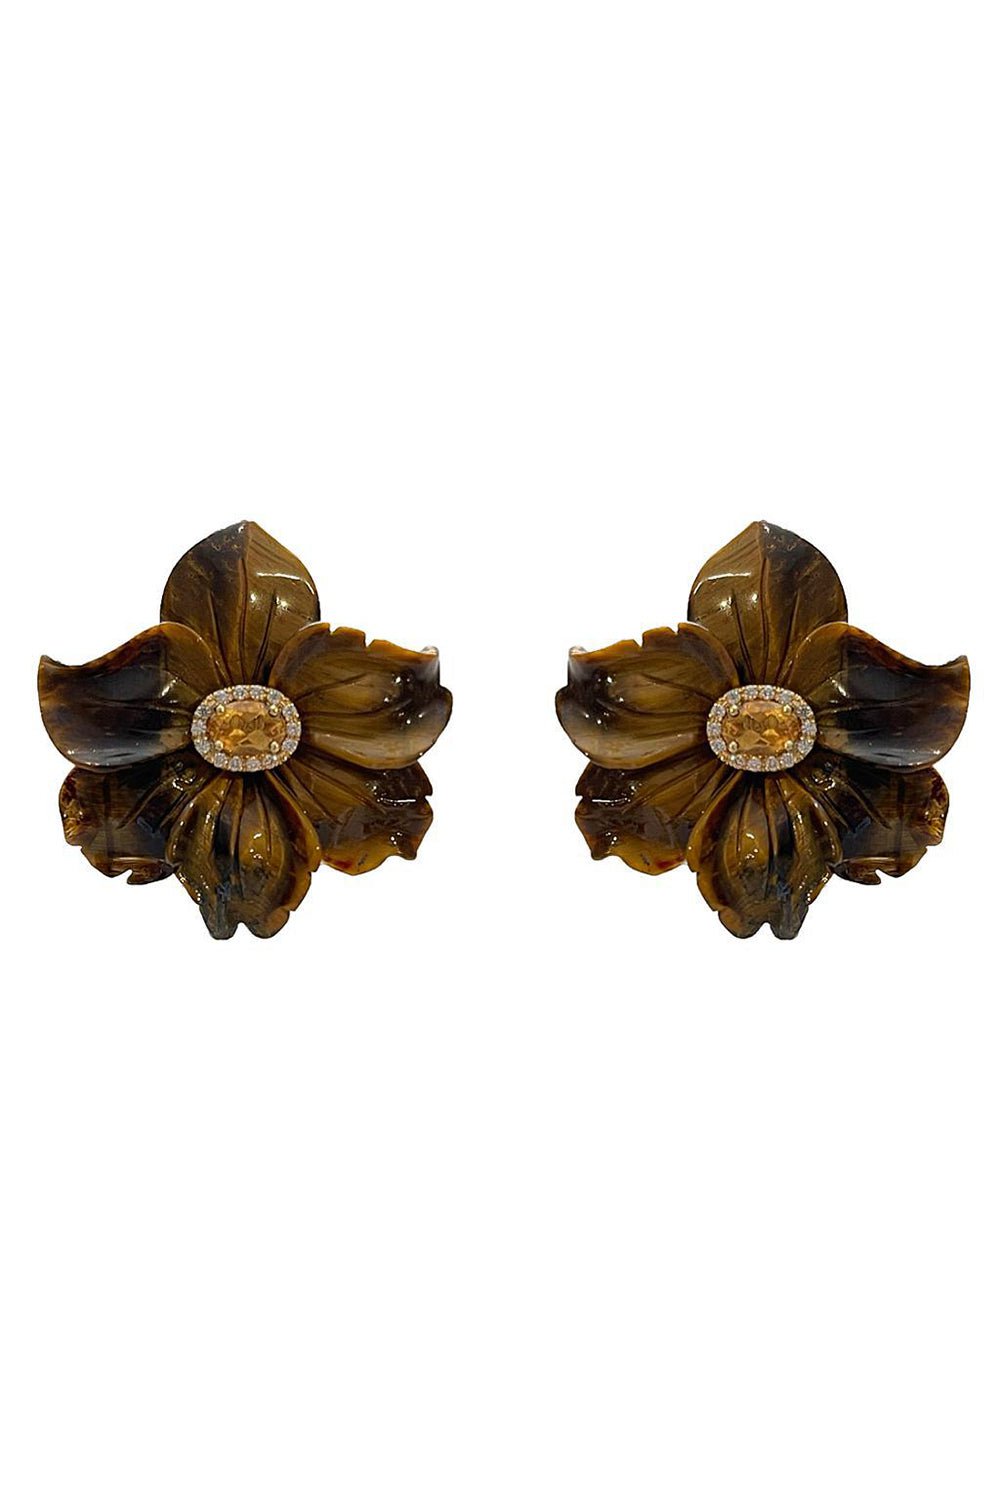 CASA CASTRO-Citrine Mother Nature Earrings-YELLOW GOLD